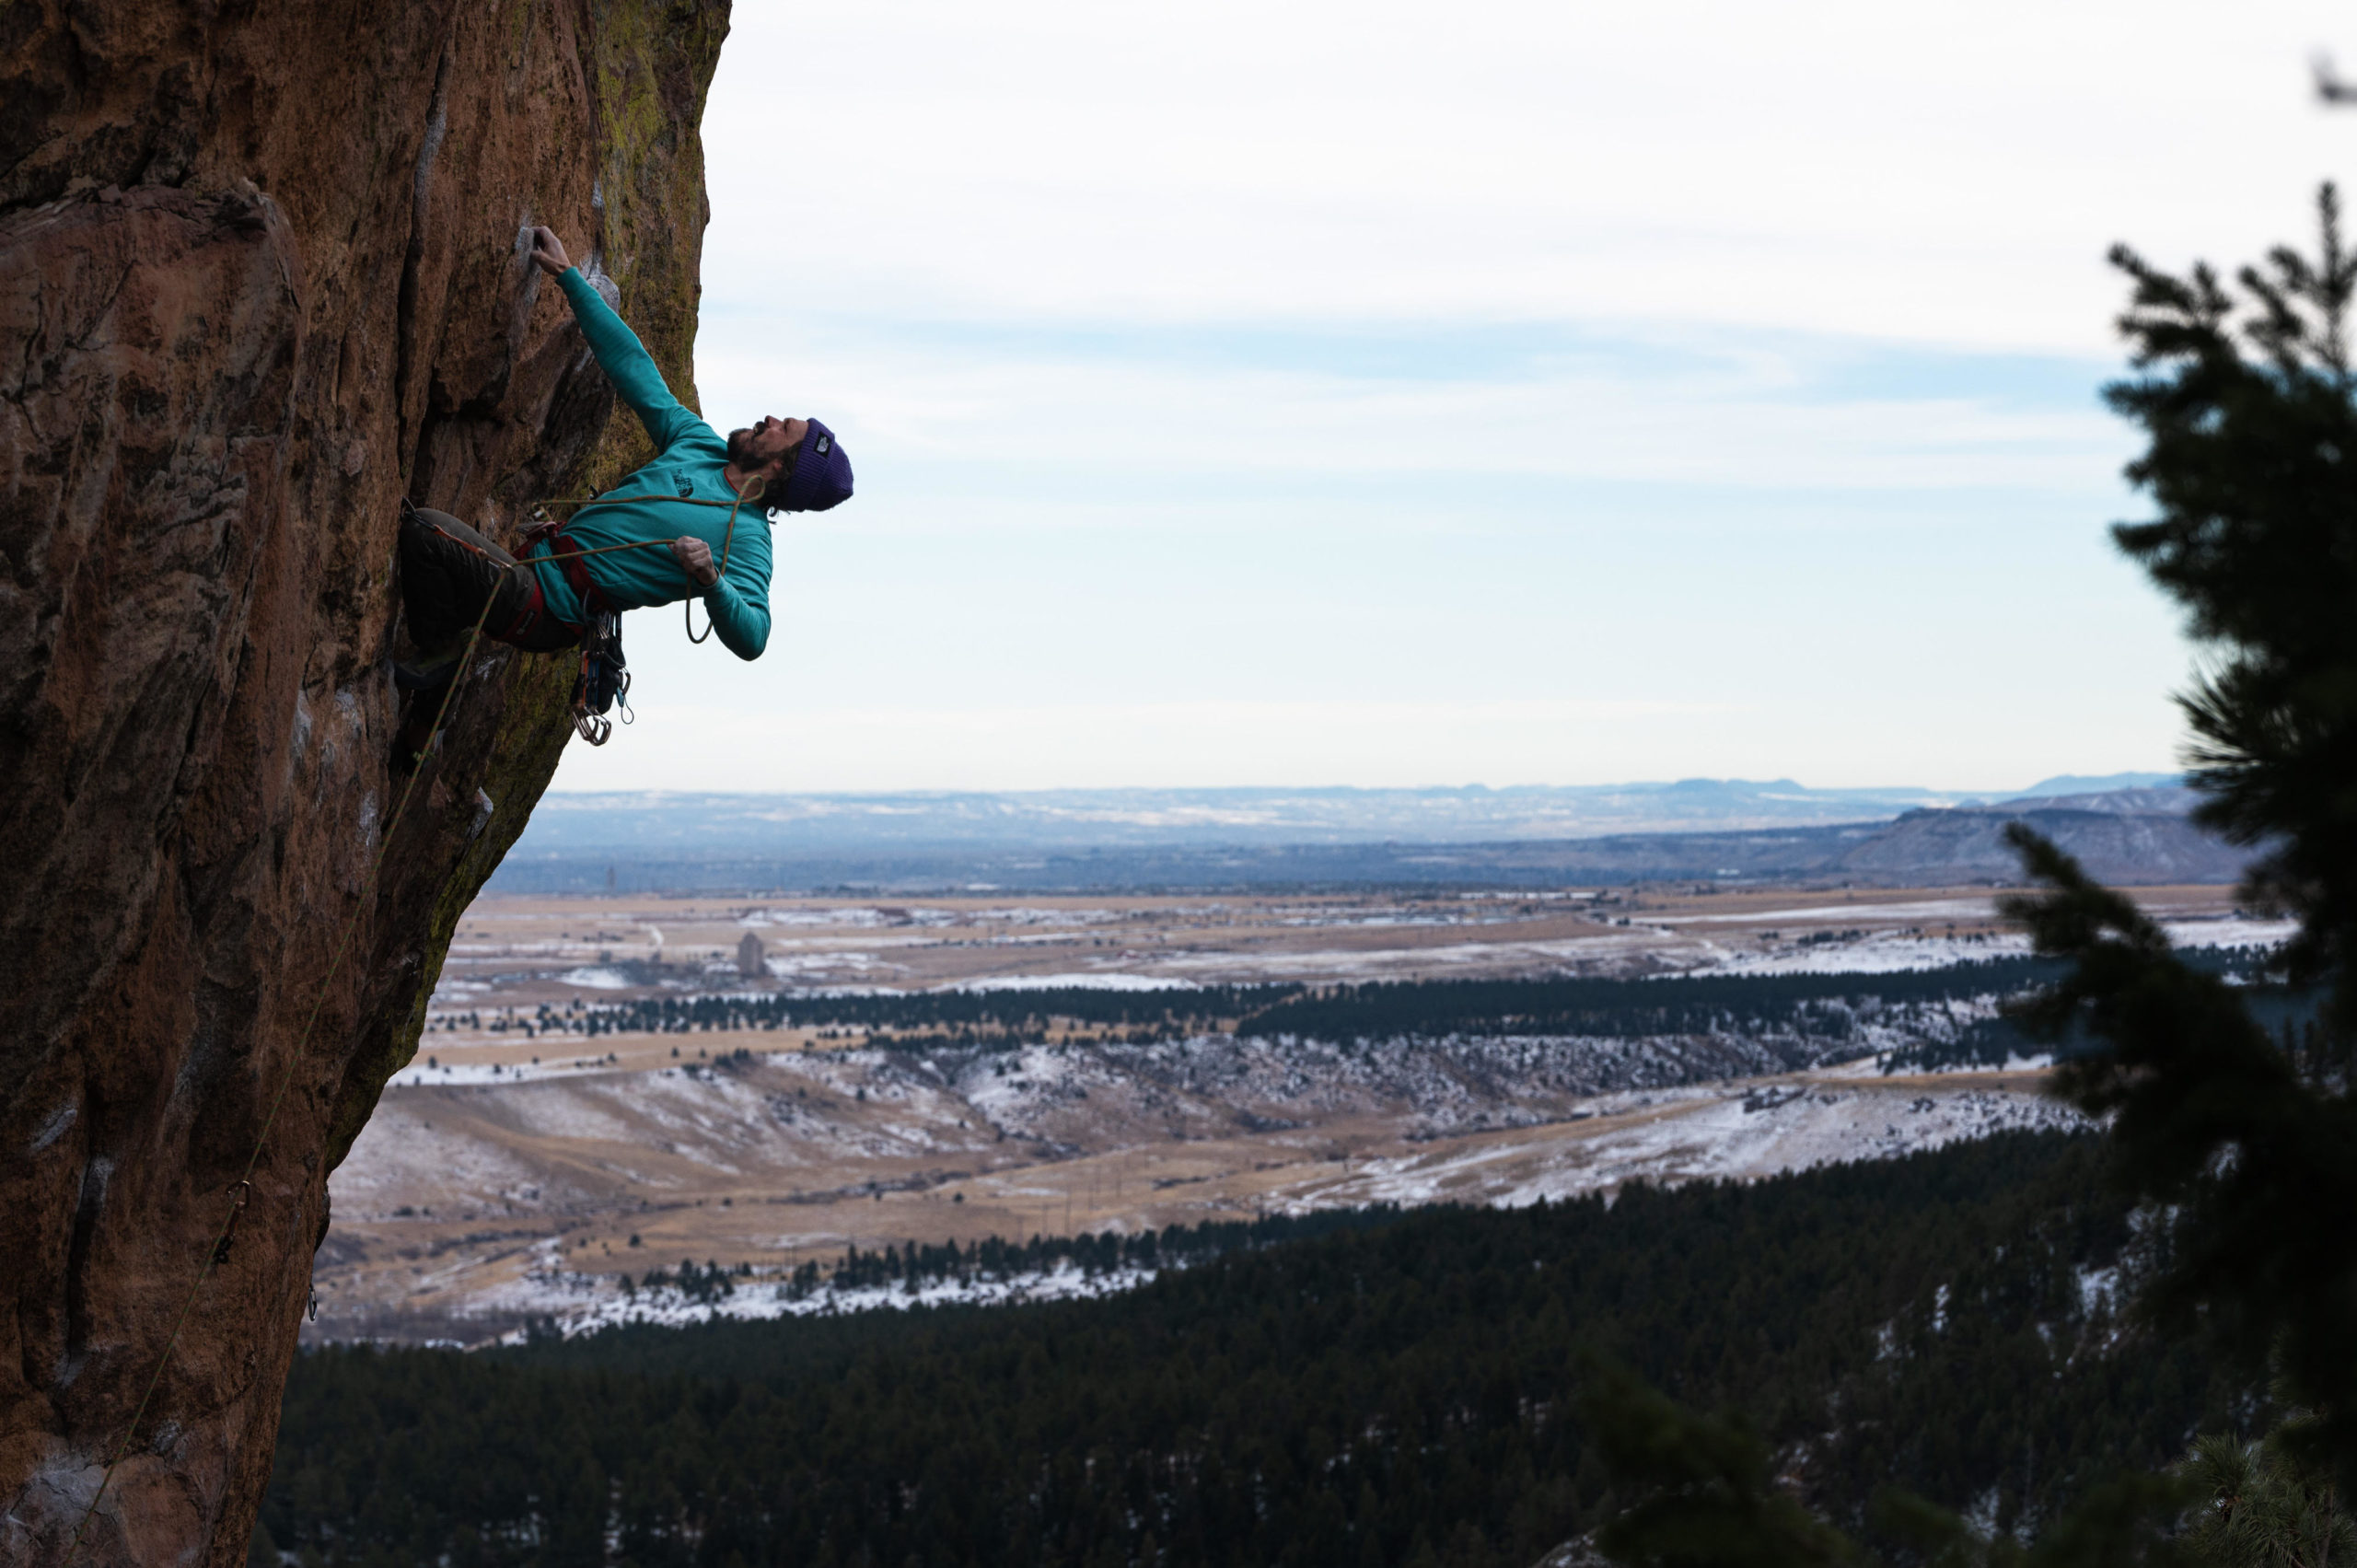 Segal is hanging onto a rock wall with one hand. His feet are placed on the rock below, and his other hand is pulling the rope attaching him to the wall up to clip it in higher. Snowy plains extend behind.